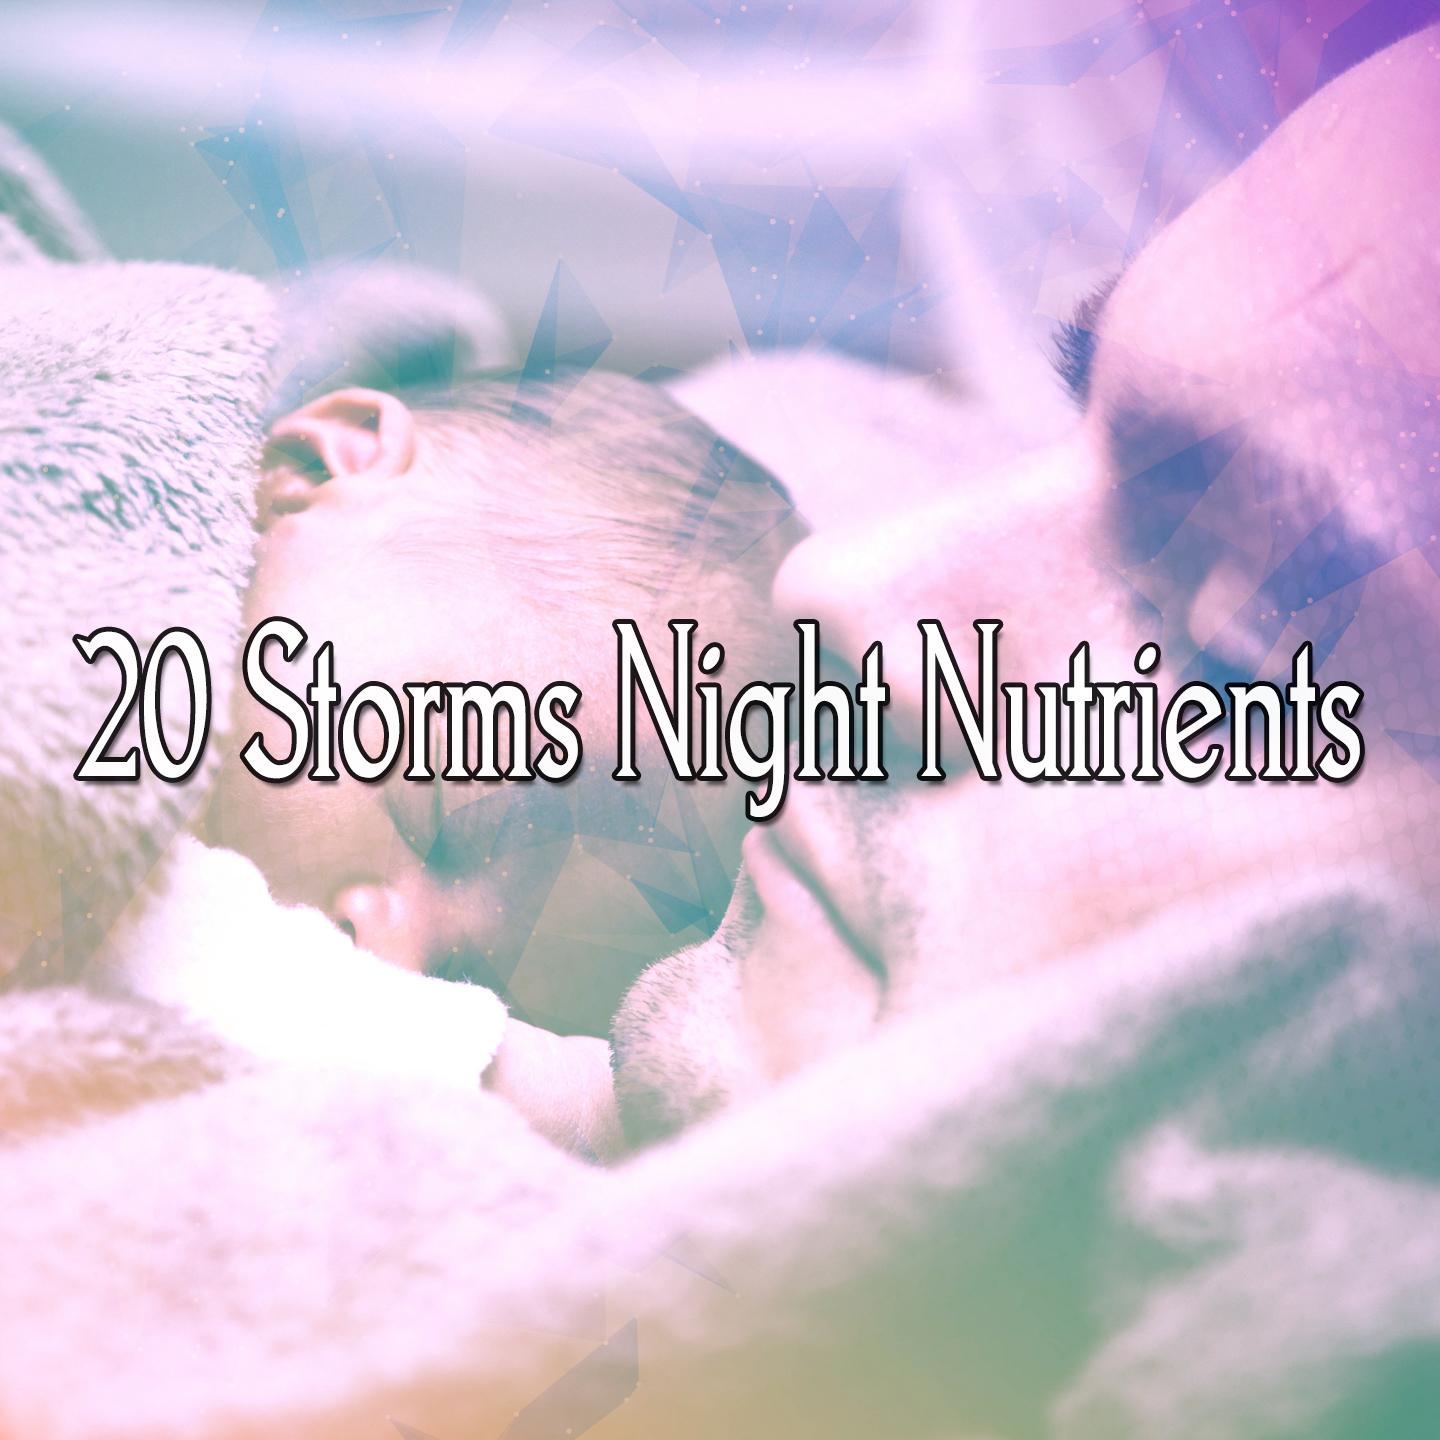 20 Storms Night Nutrients